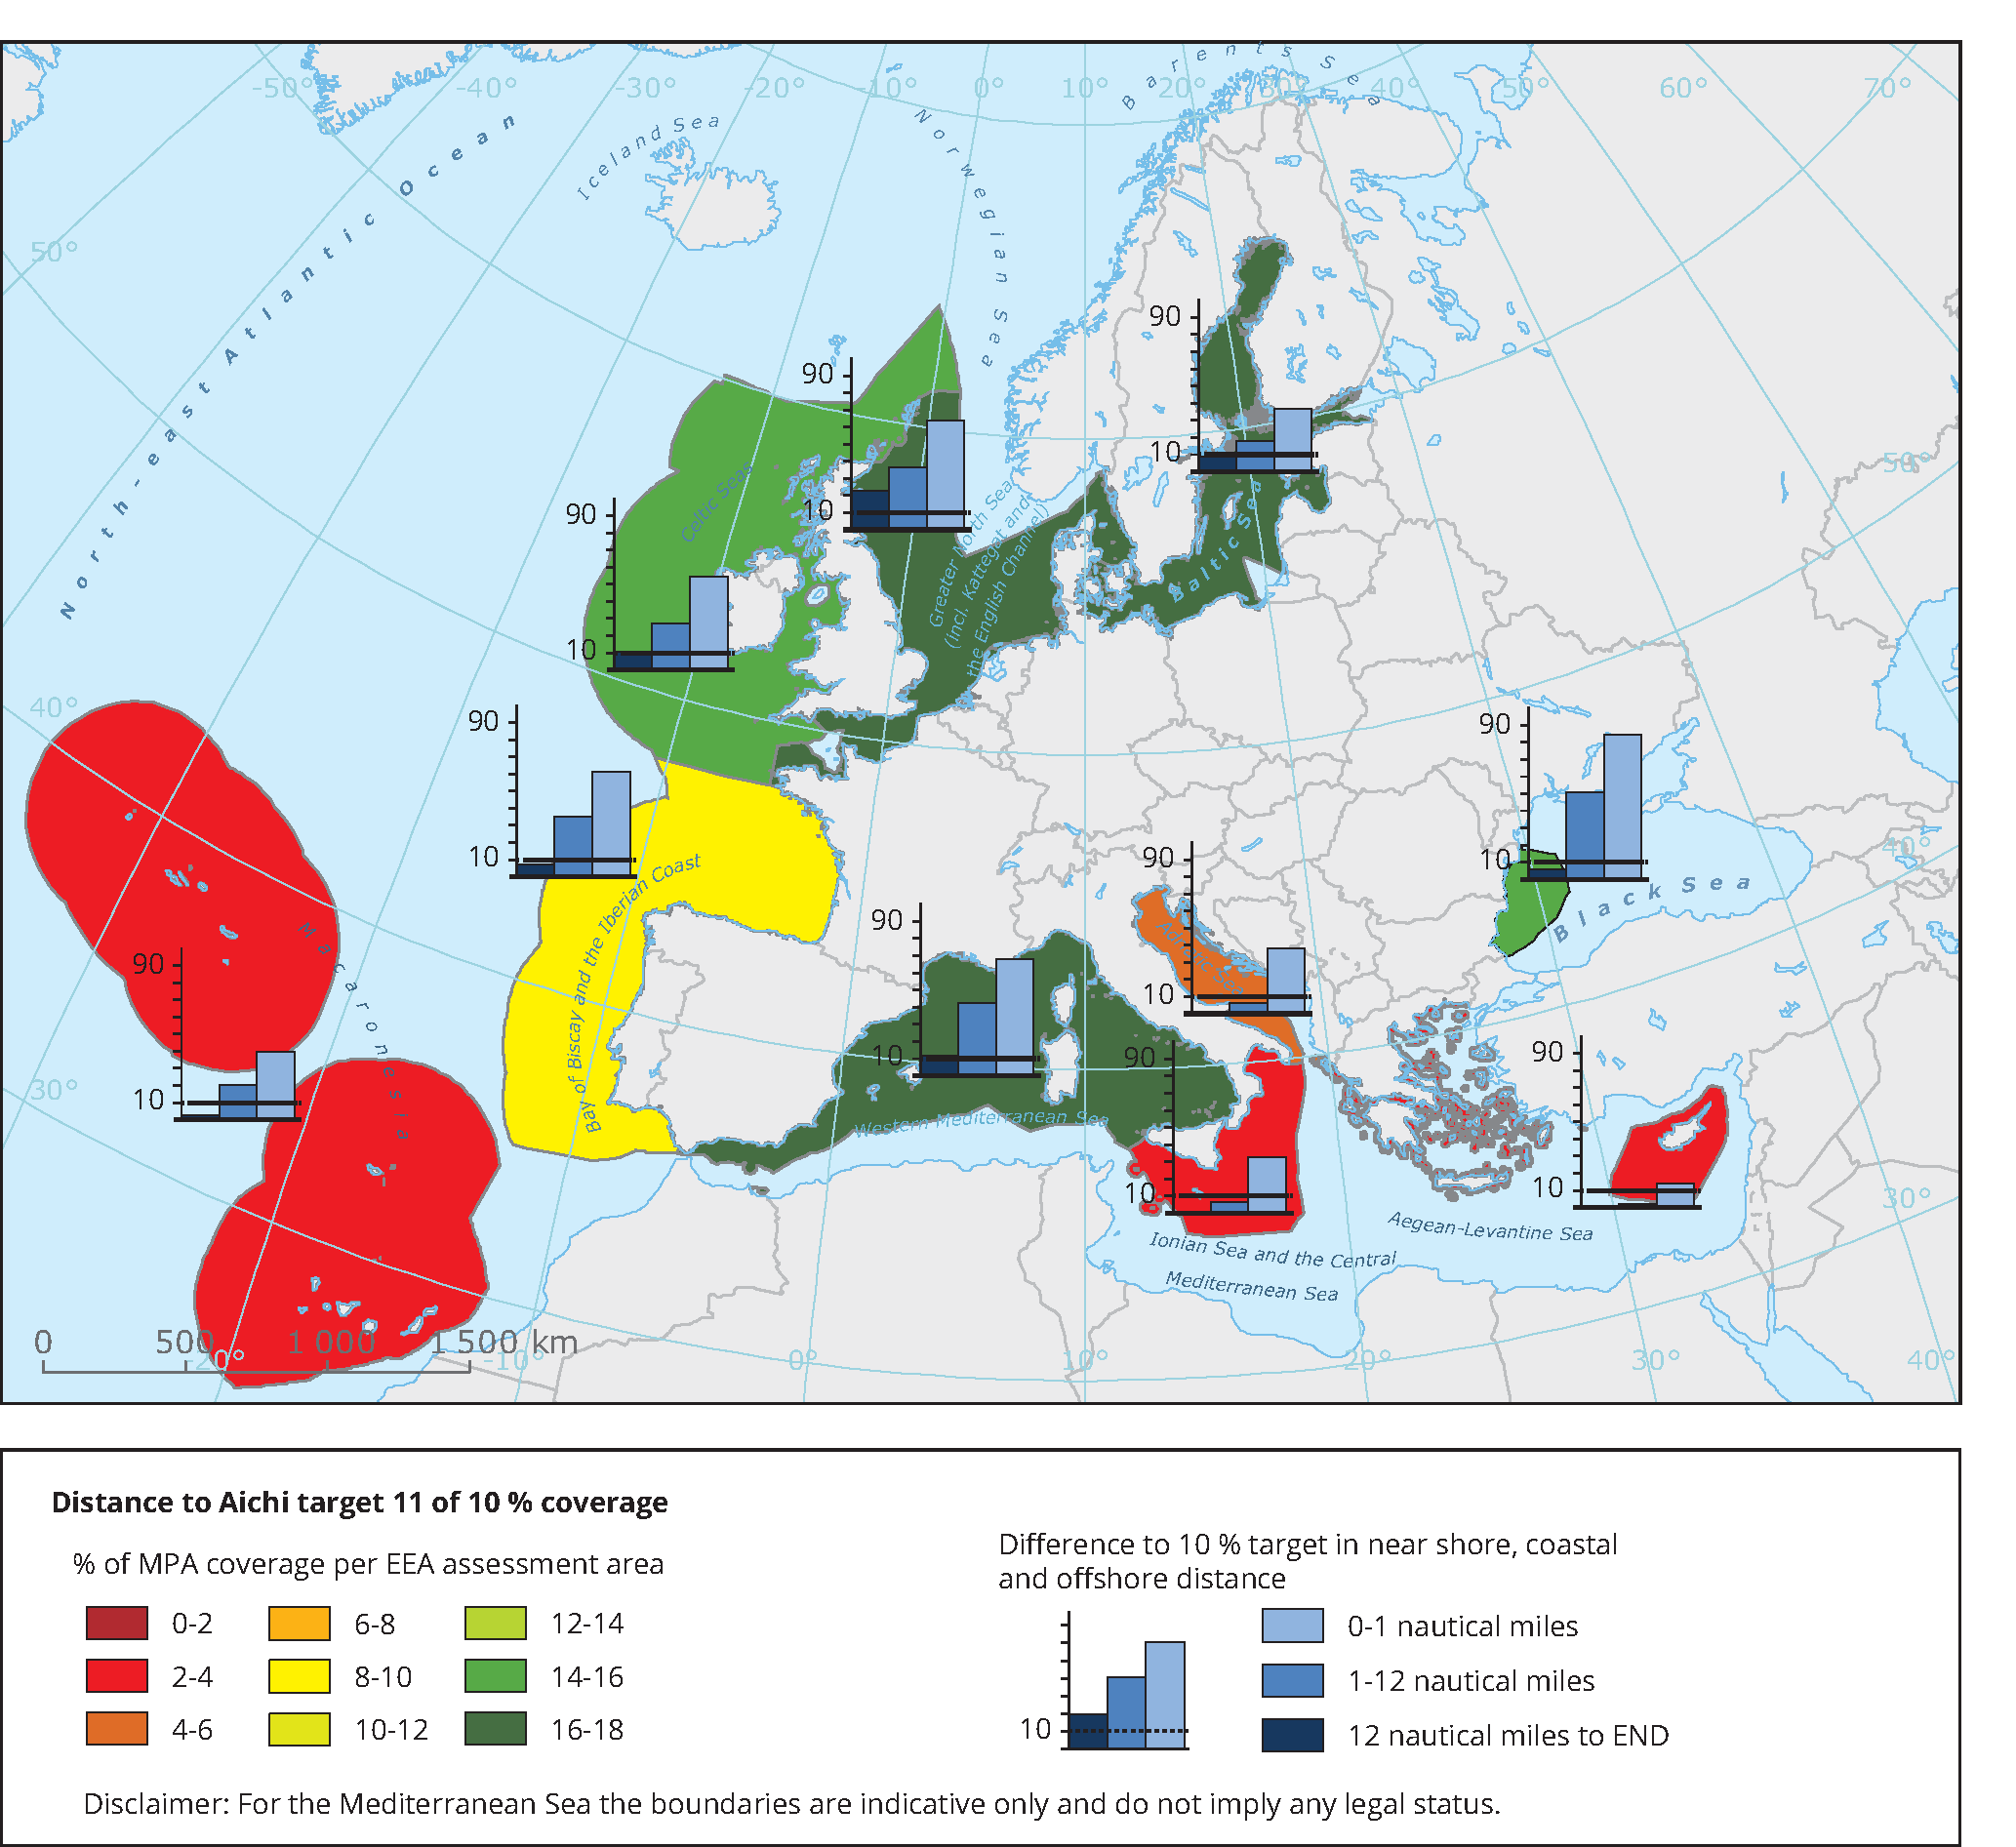 marine protected areas map